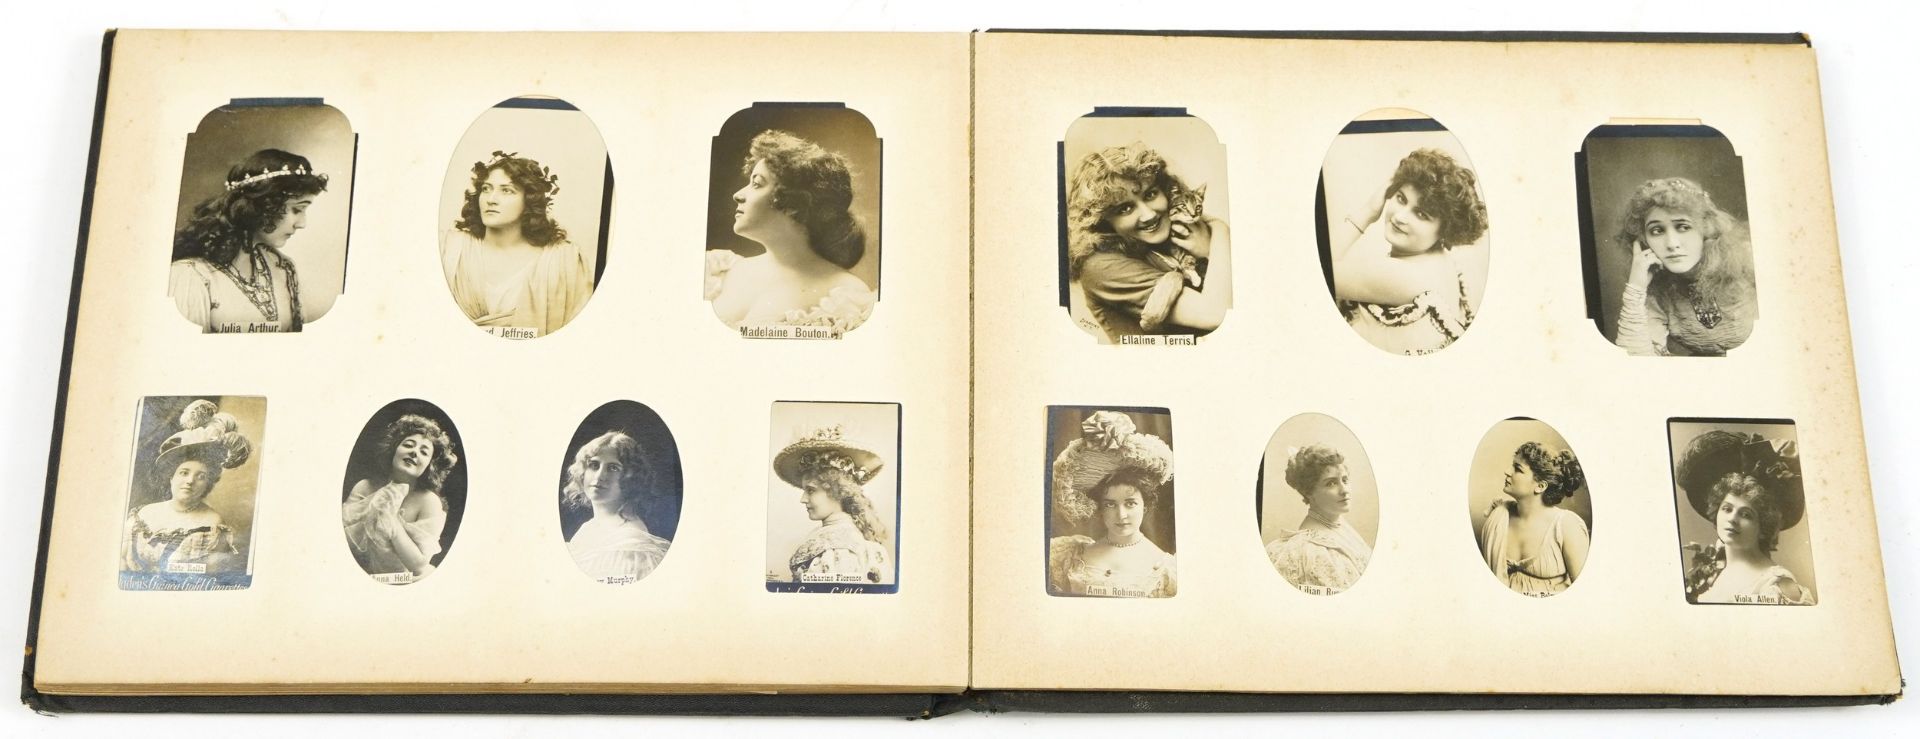 Ogden's photo album with photos including Lord Kitchener, Baden Power and theatrical actresses - Bild 8 aus 10